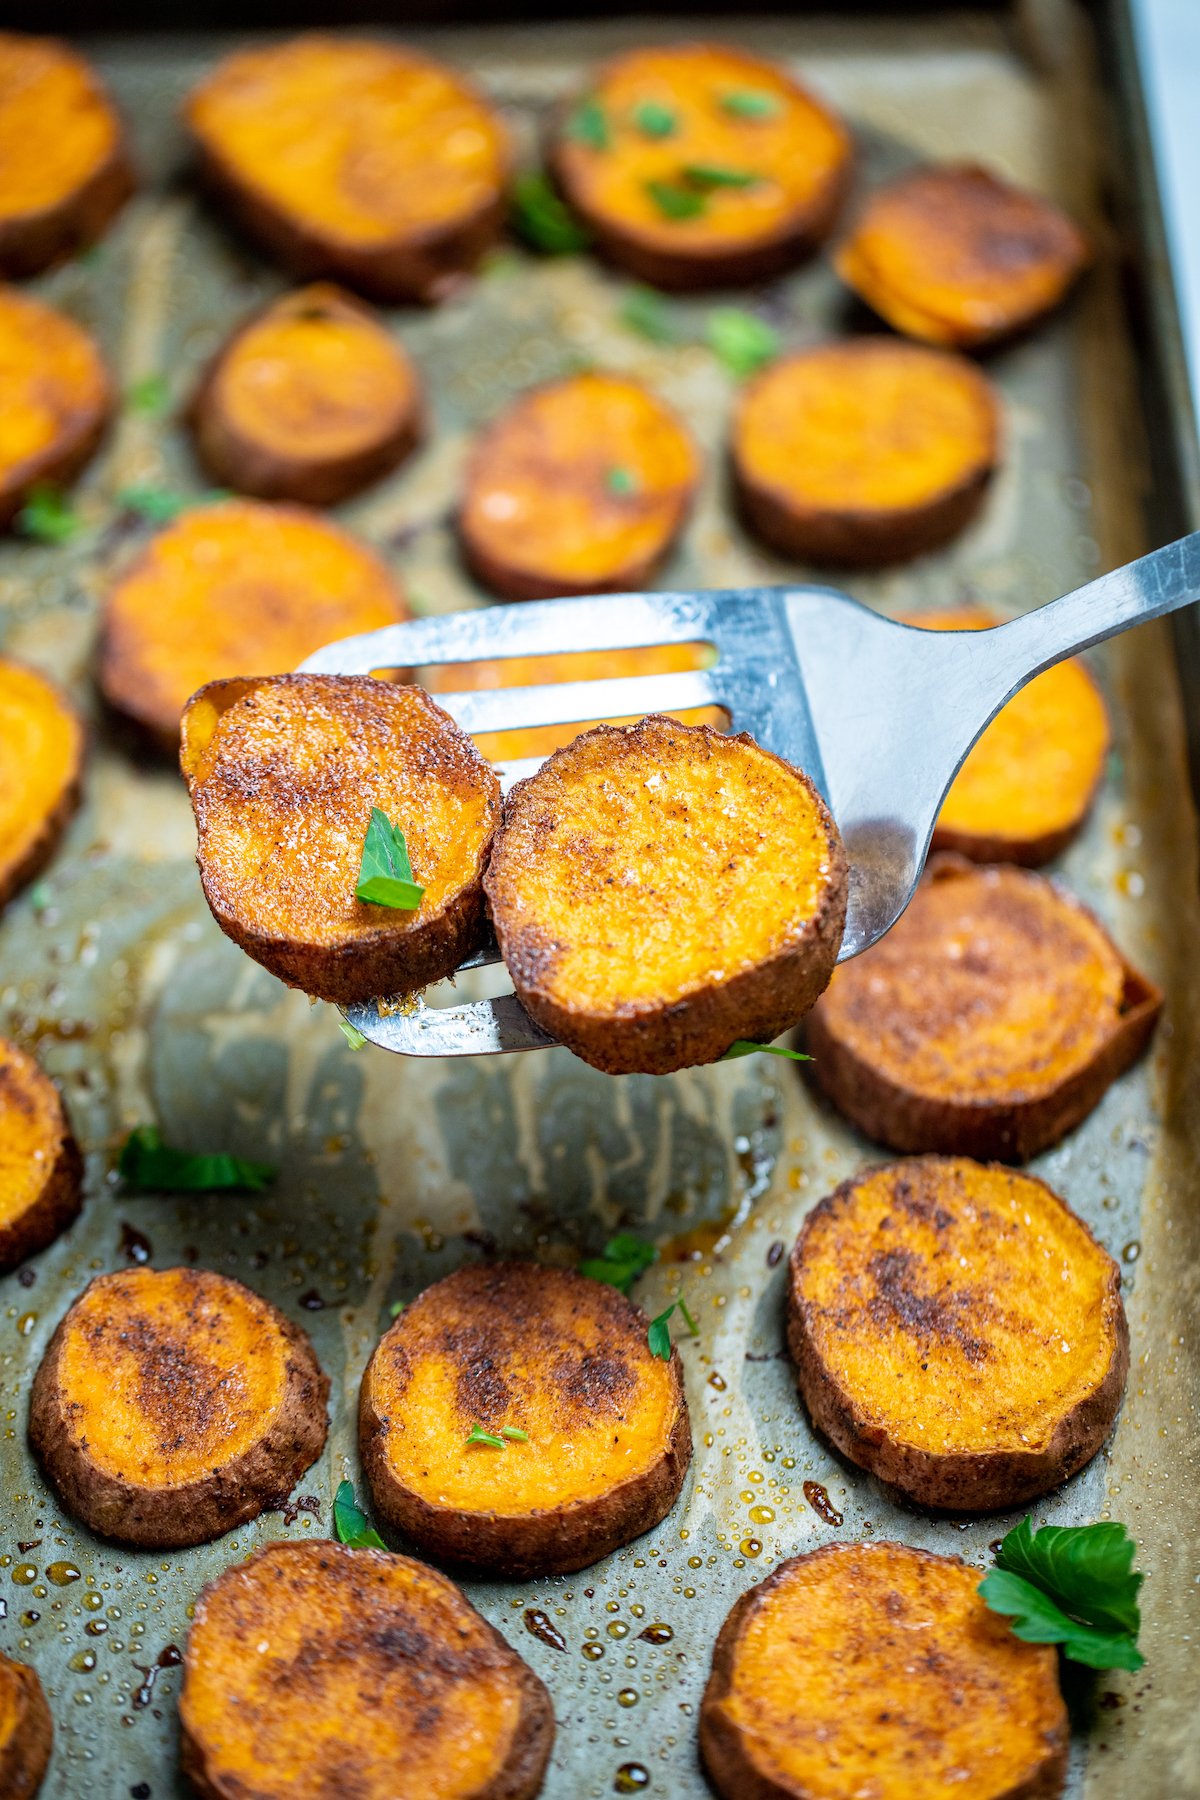 A spatula lifting up two sweet potato slices, above a parchment lined sheet pan with caramelized sweet potato rounds and fresh parsley.